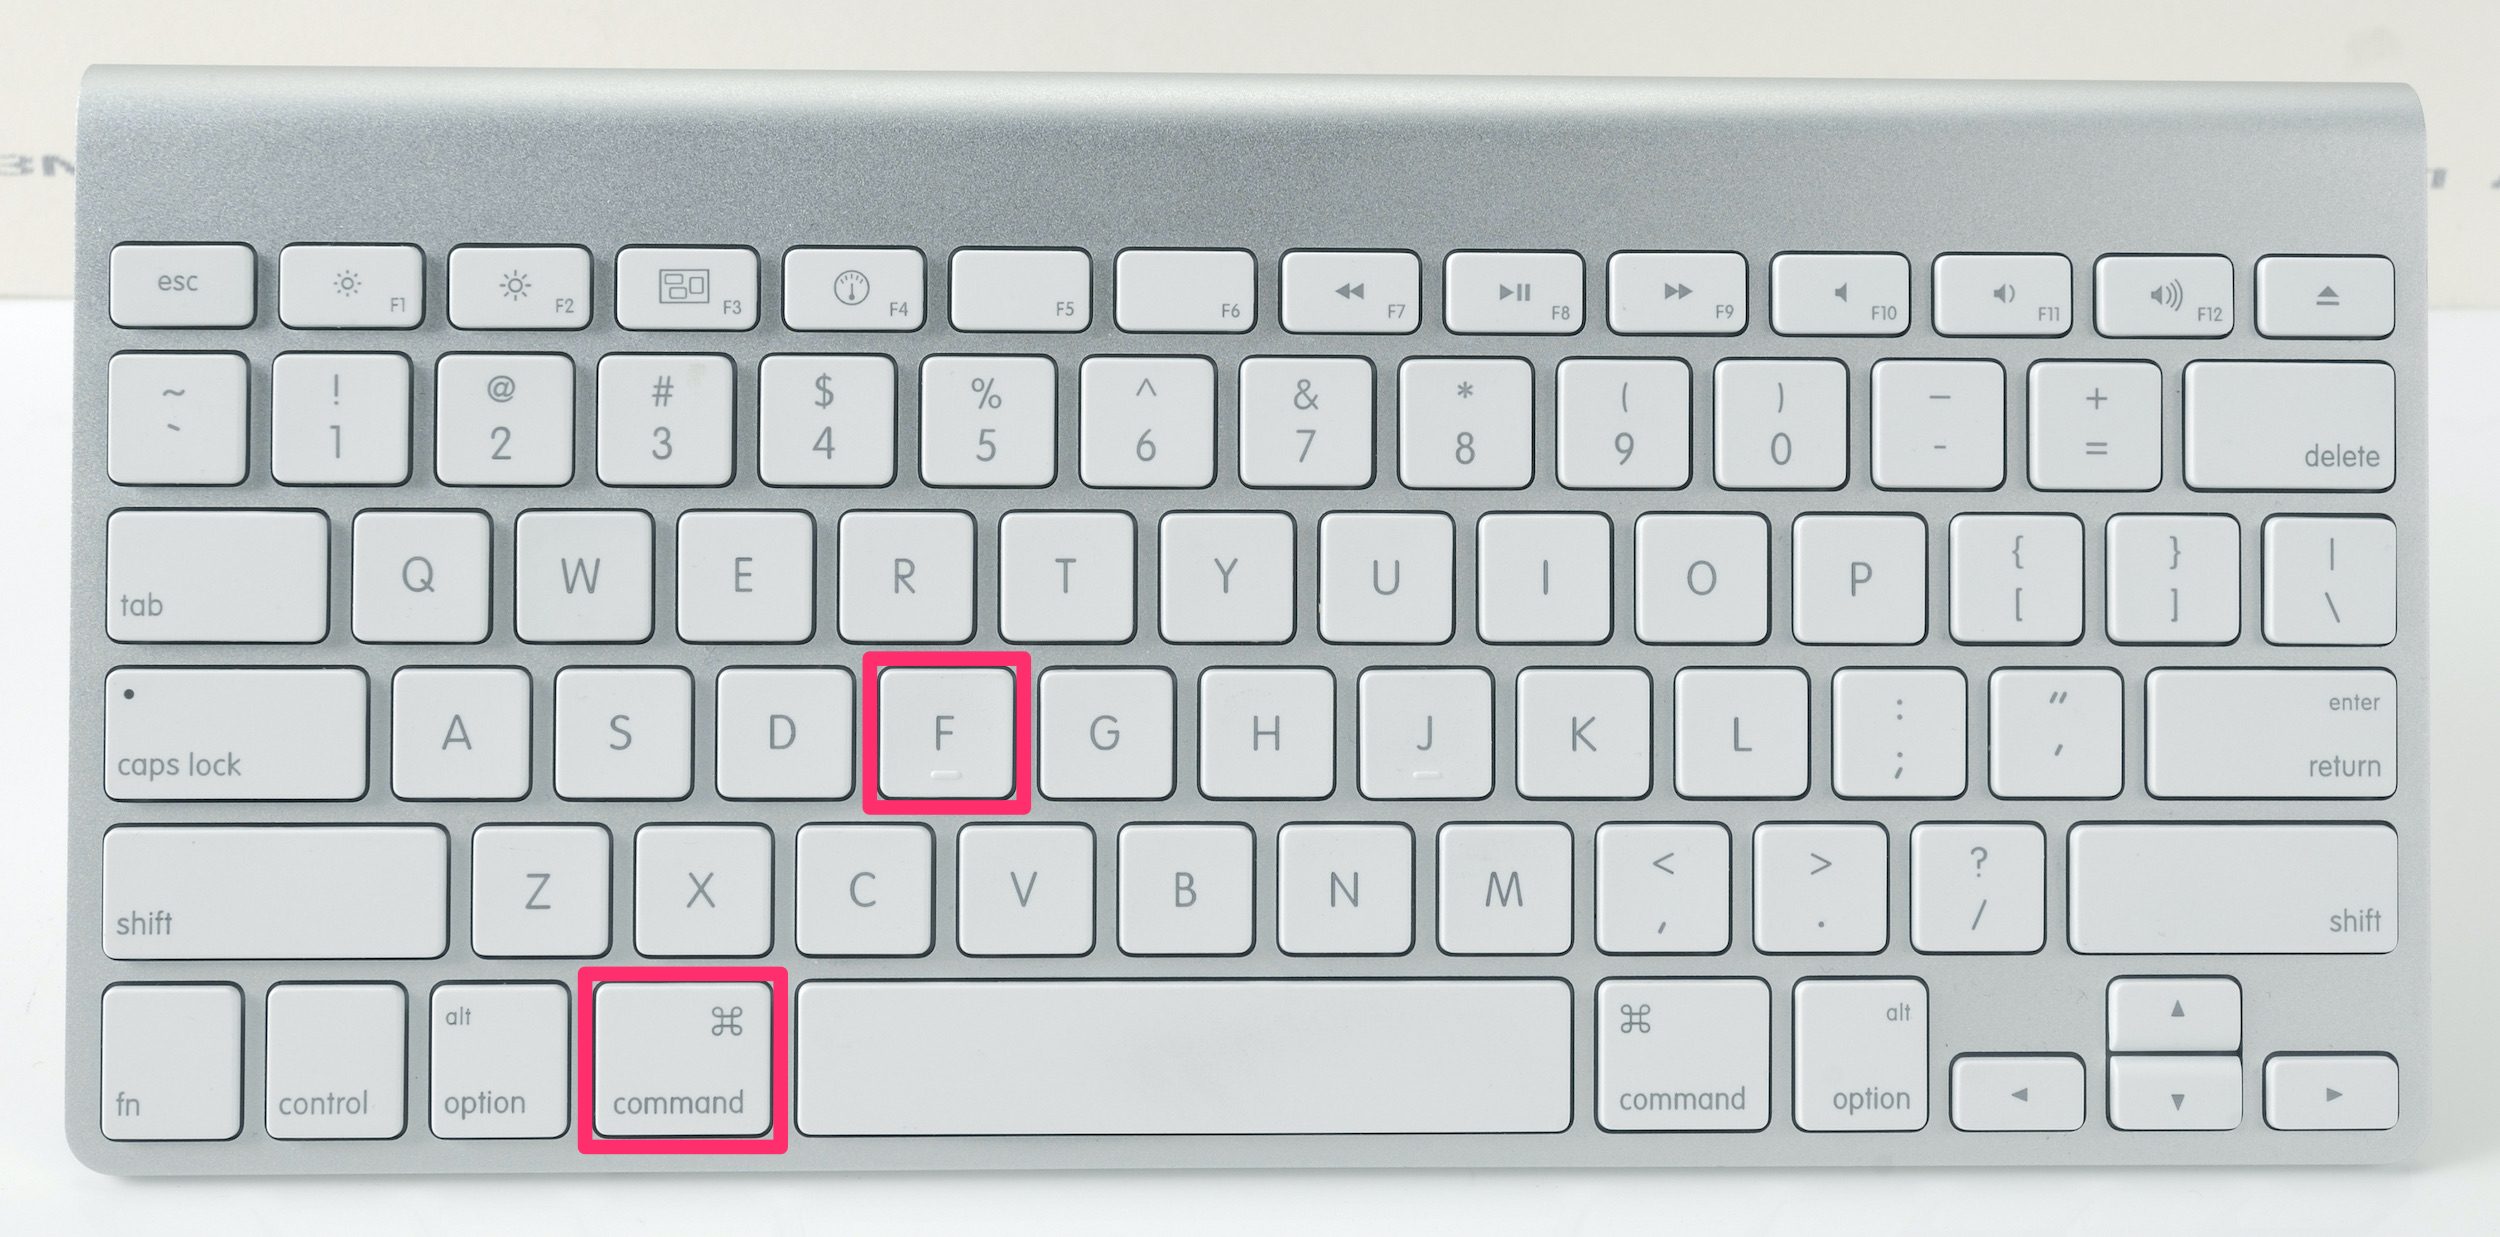 Close-up of a Mac keyboard with Command + F keys highlighted